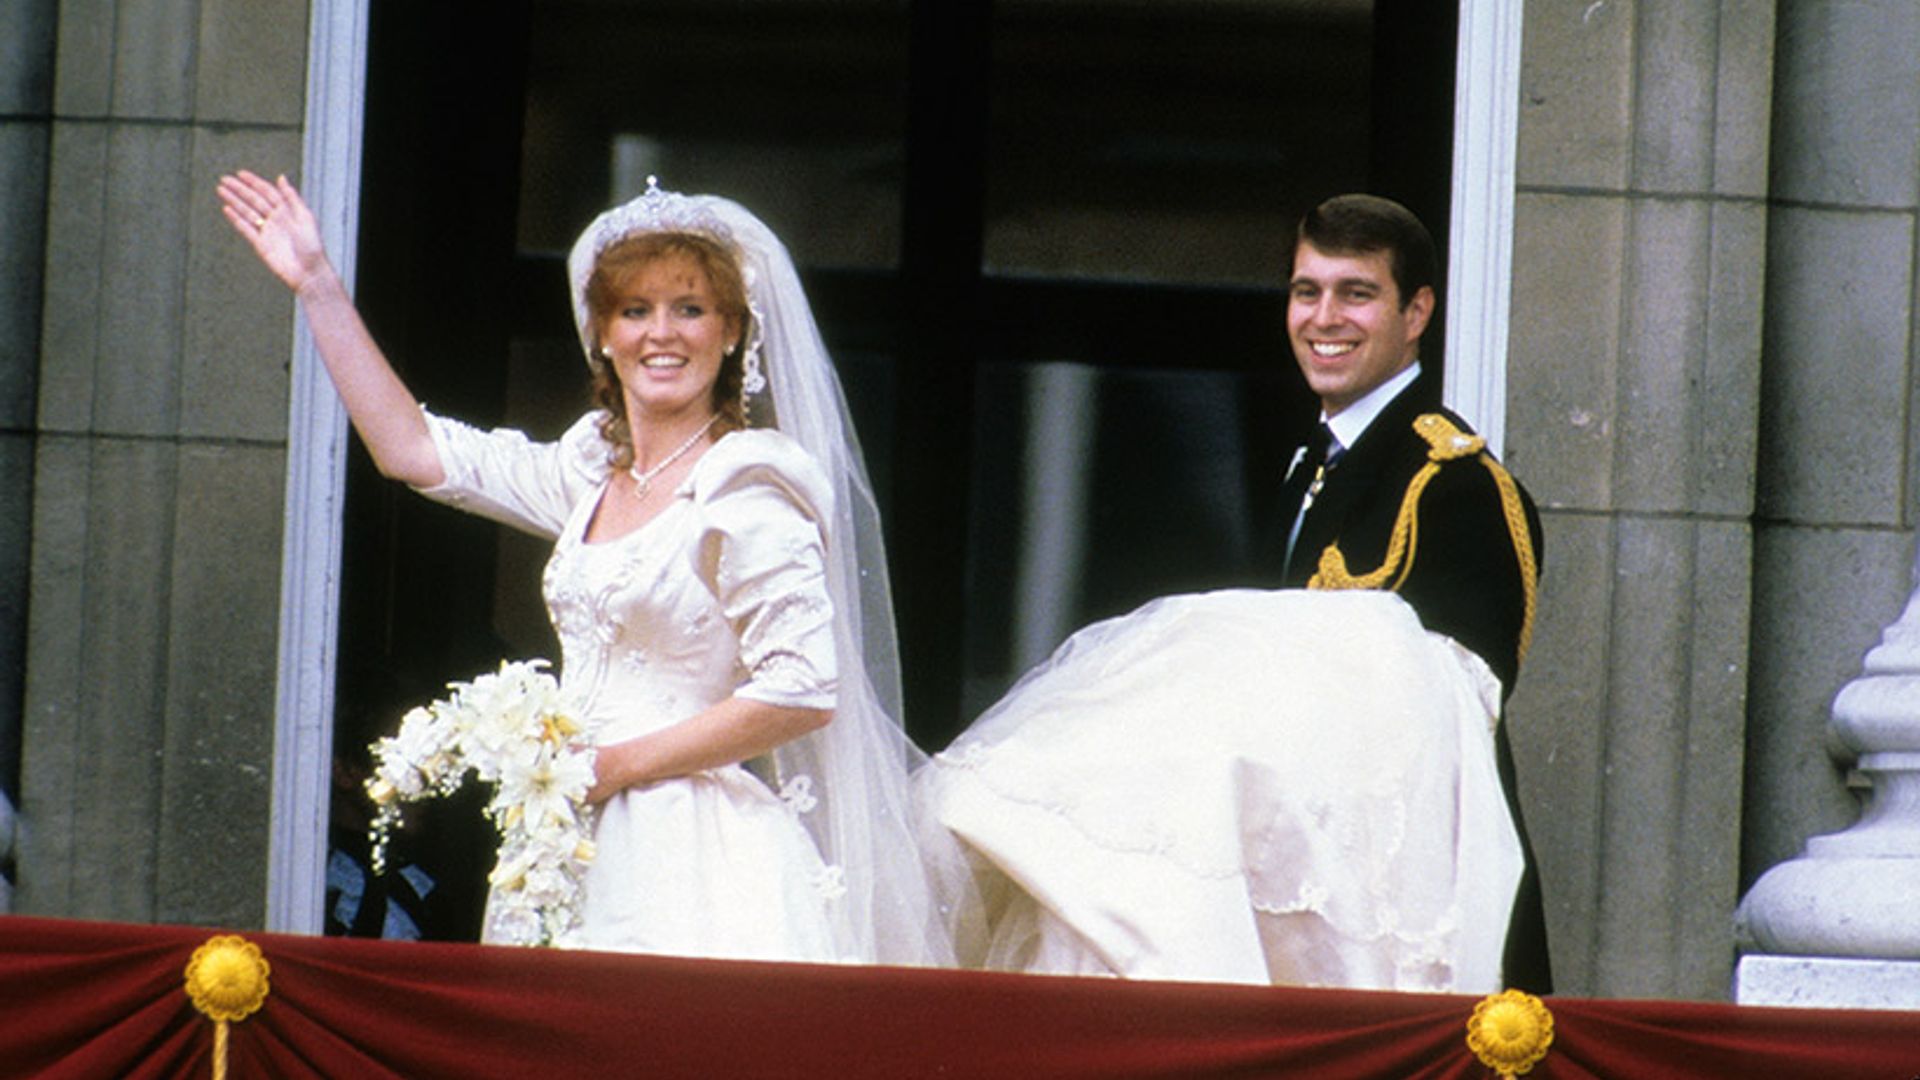 Sarah Ferguson and Prince Andrew spent what would have been their 30th wedding anniversary together 